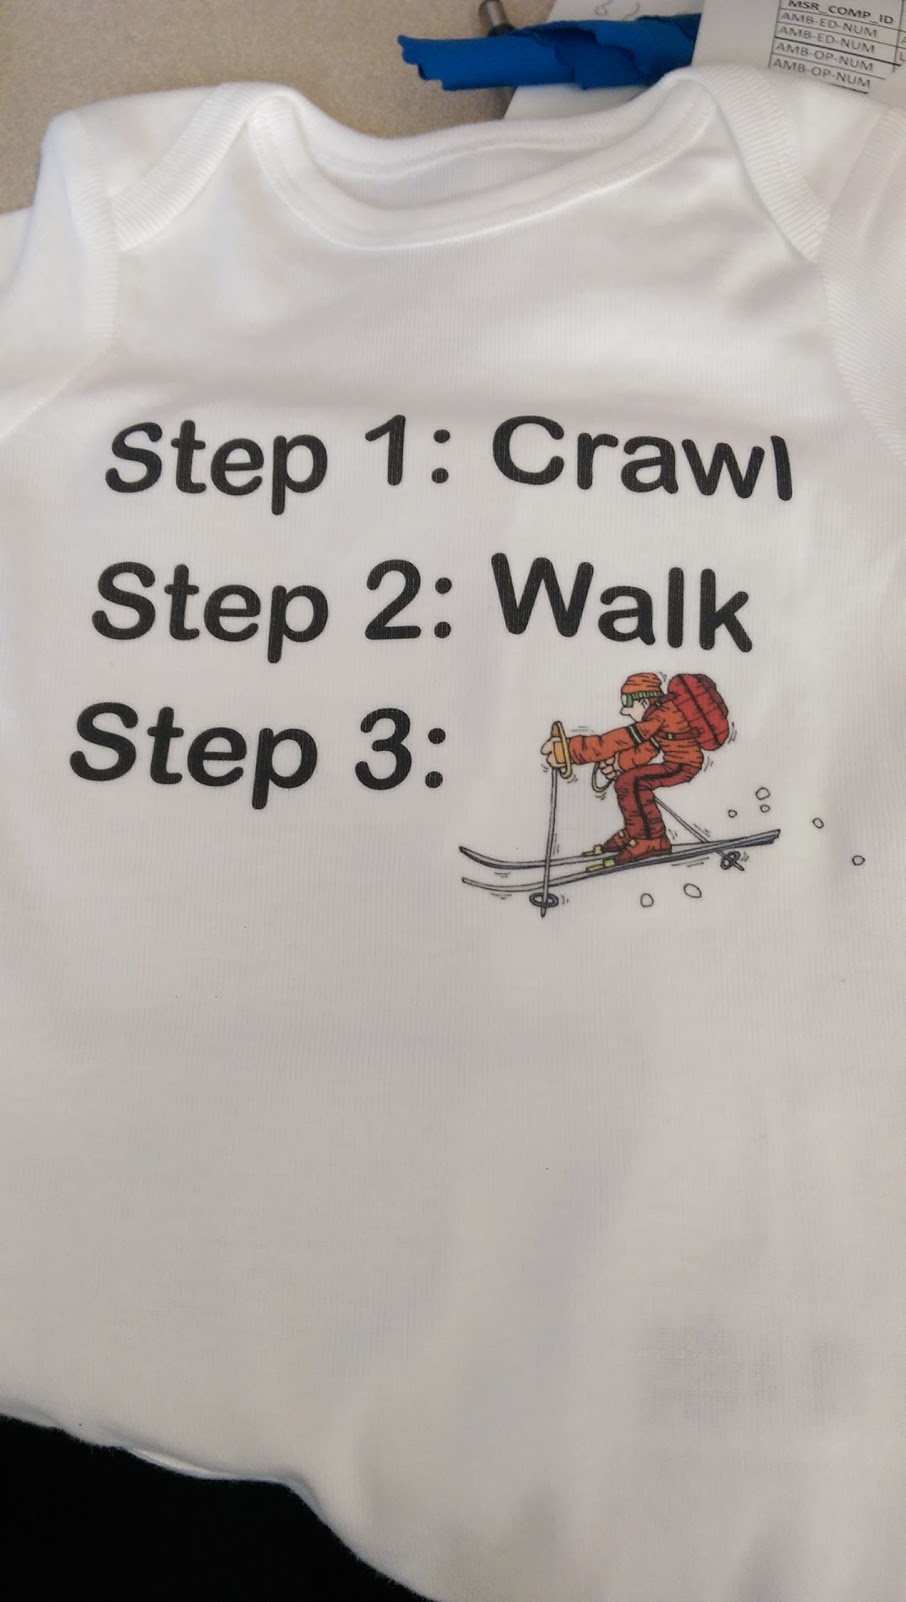 A onesie with three steps: Crawl, Walk and a picture of a guy skiing.